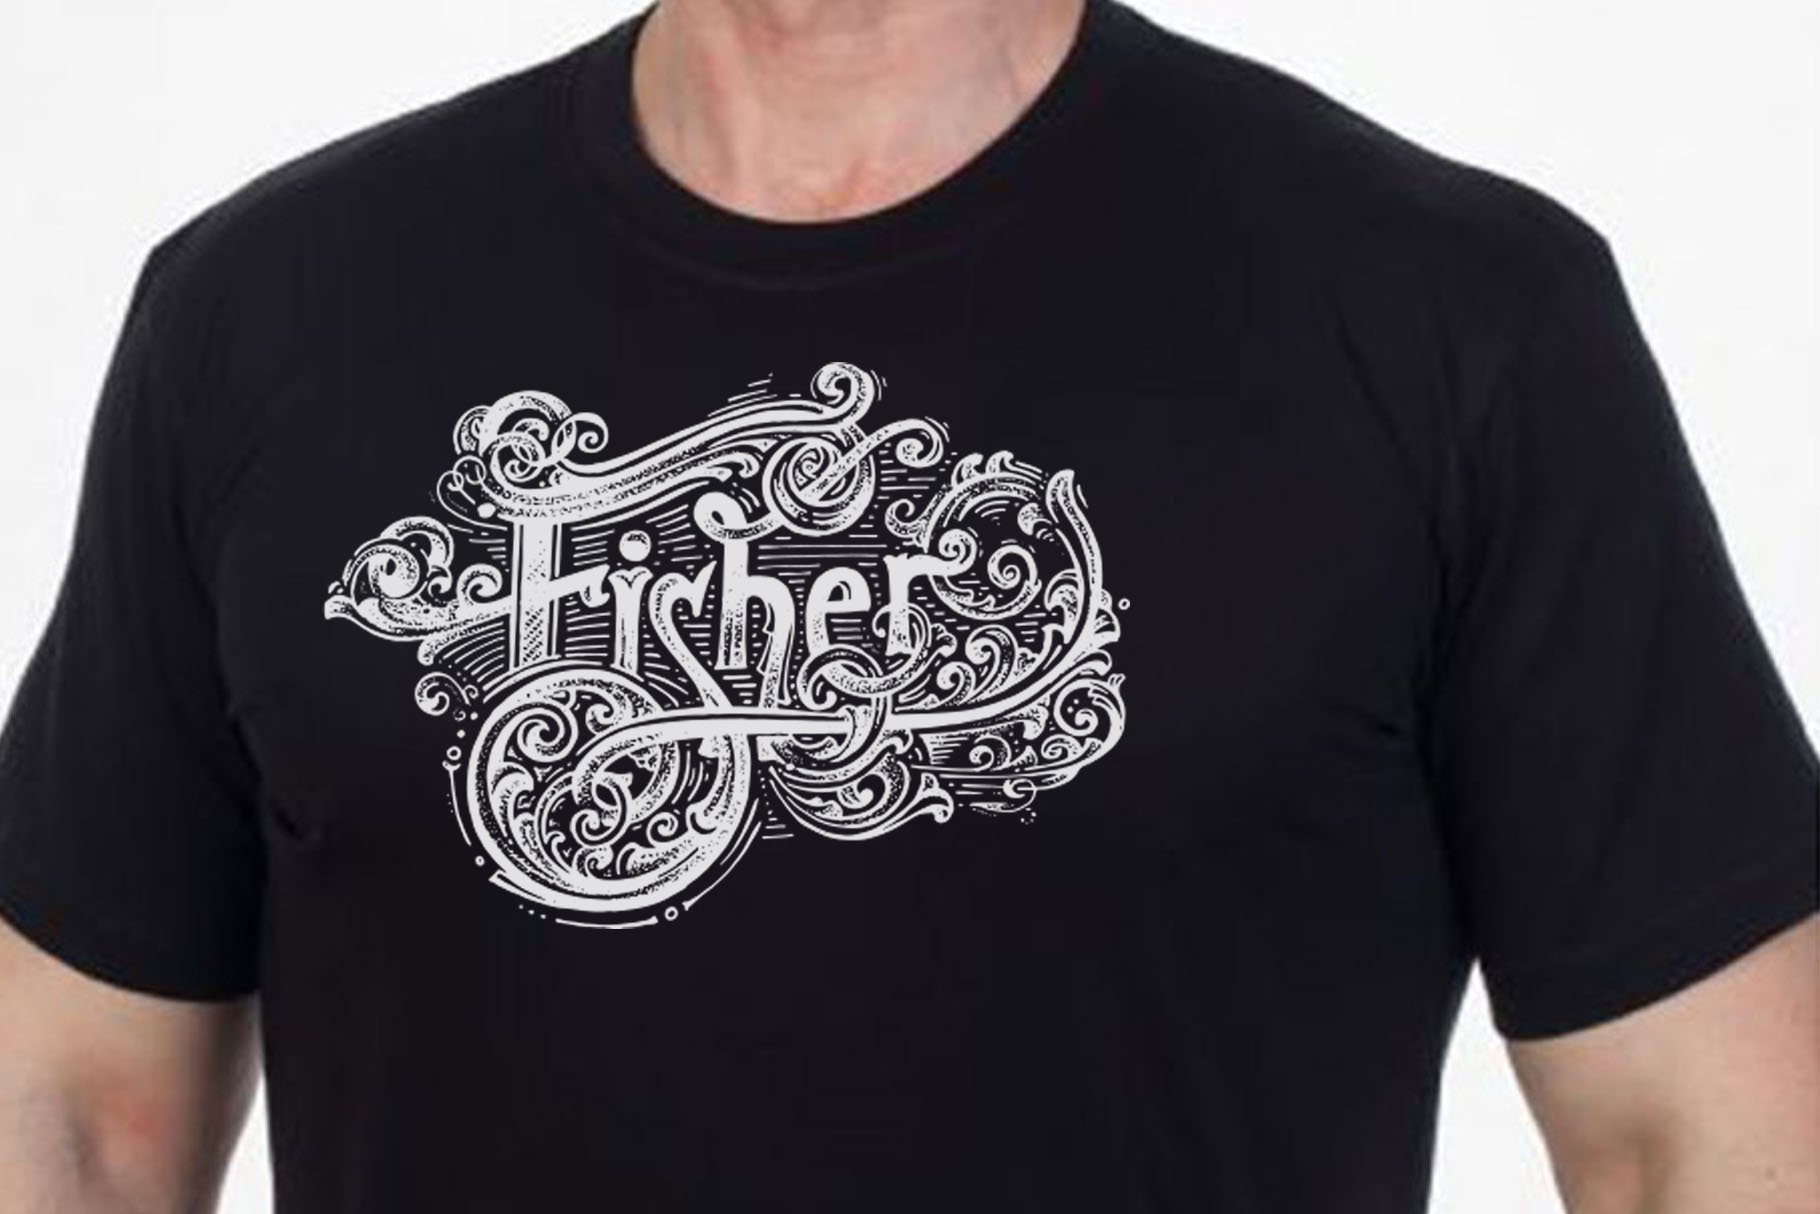 Classic black t-shirt with white fisher illustration.